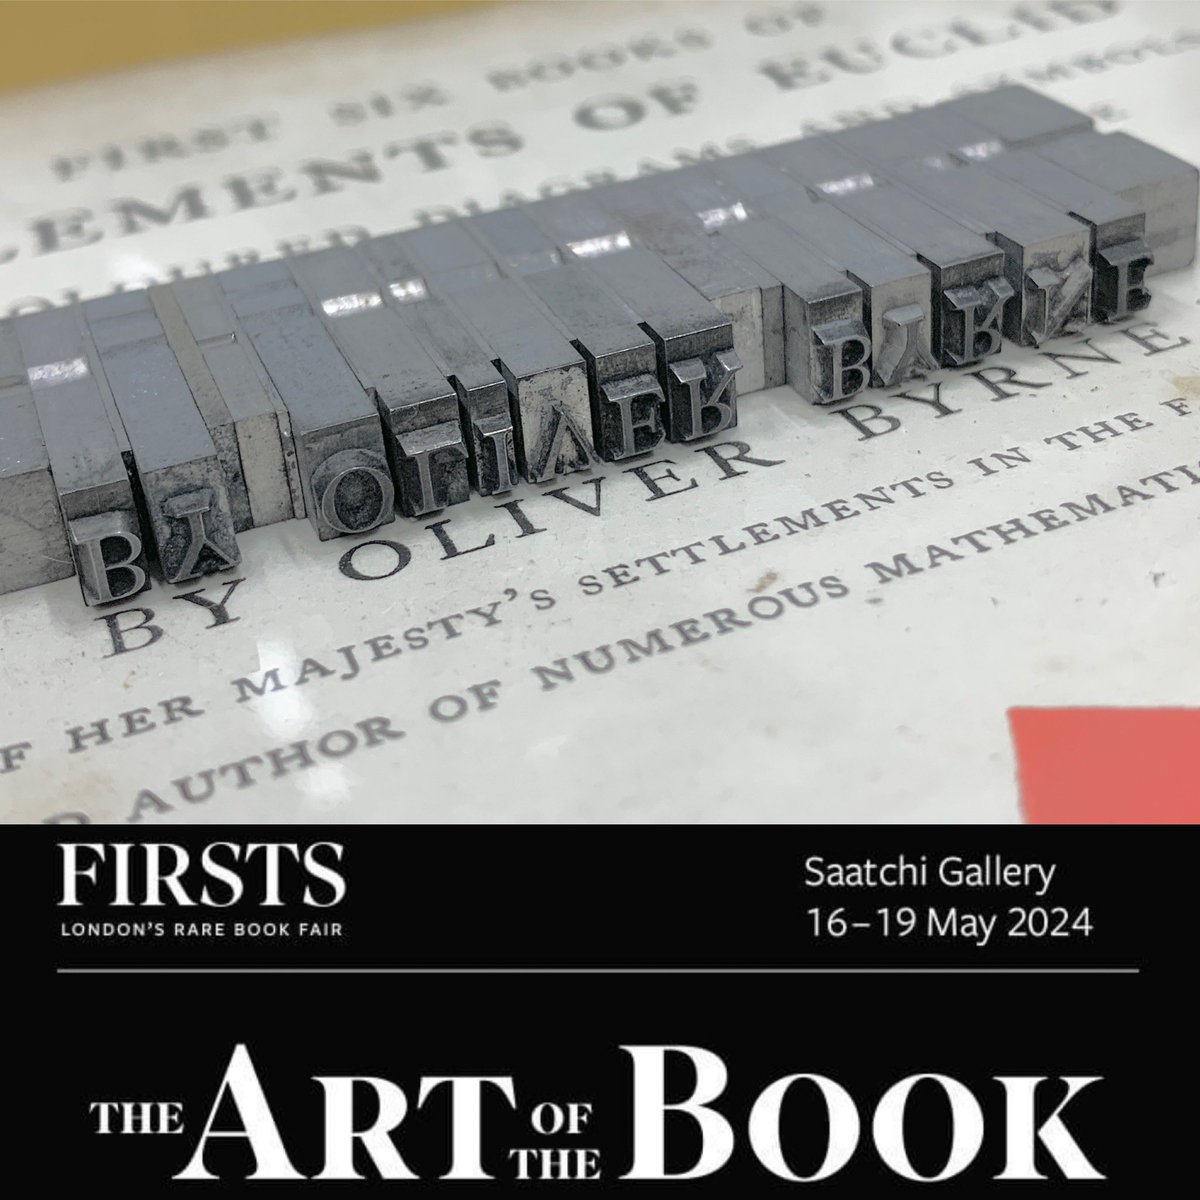 Contemporary letterpress printing on show at Stand J88 at #firstslondonbookfair @firstslondon at the #saatchigallery